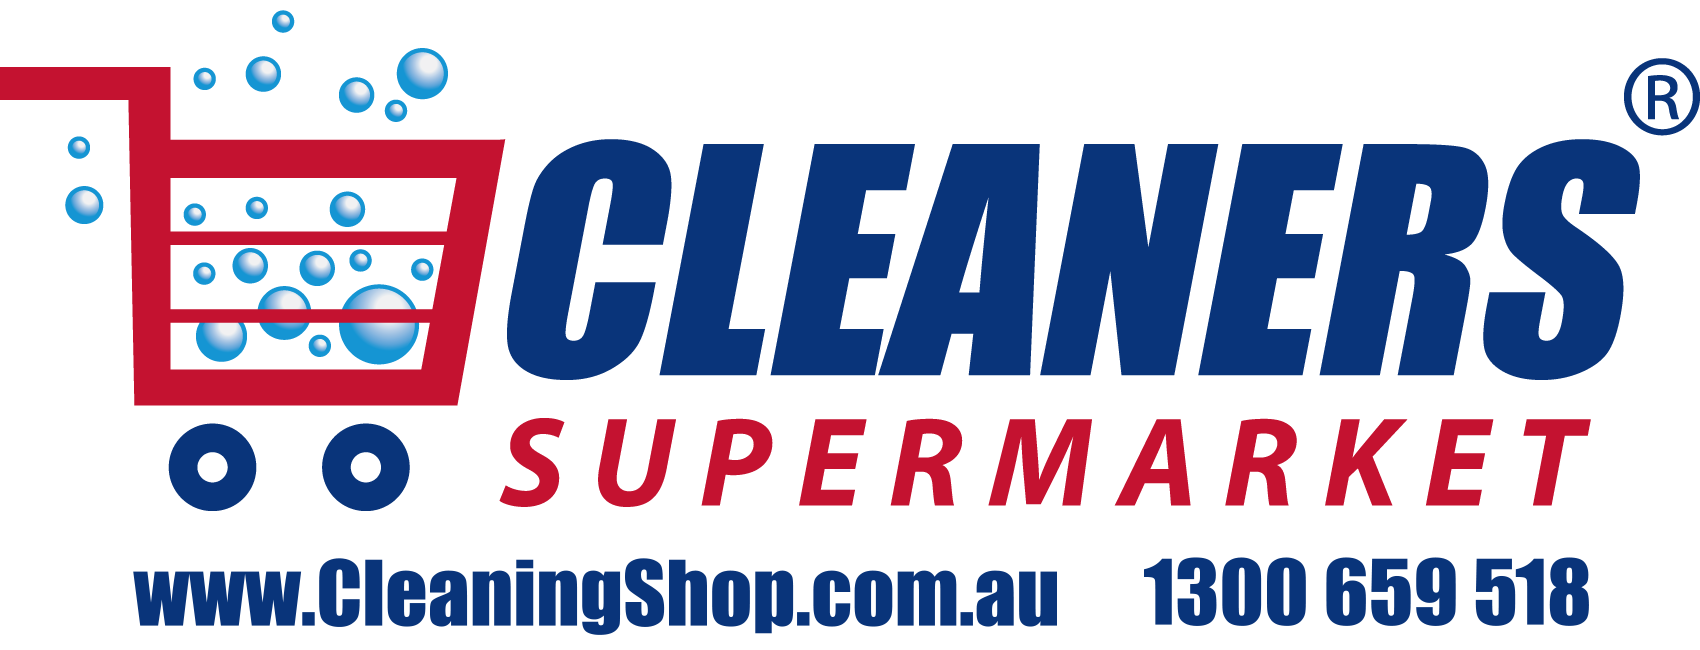 Logo Cleaners Supermarket